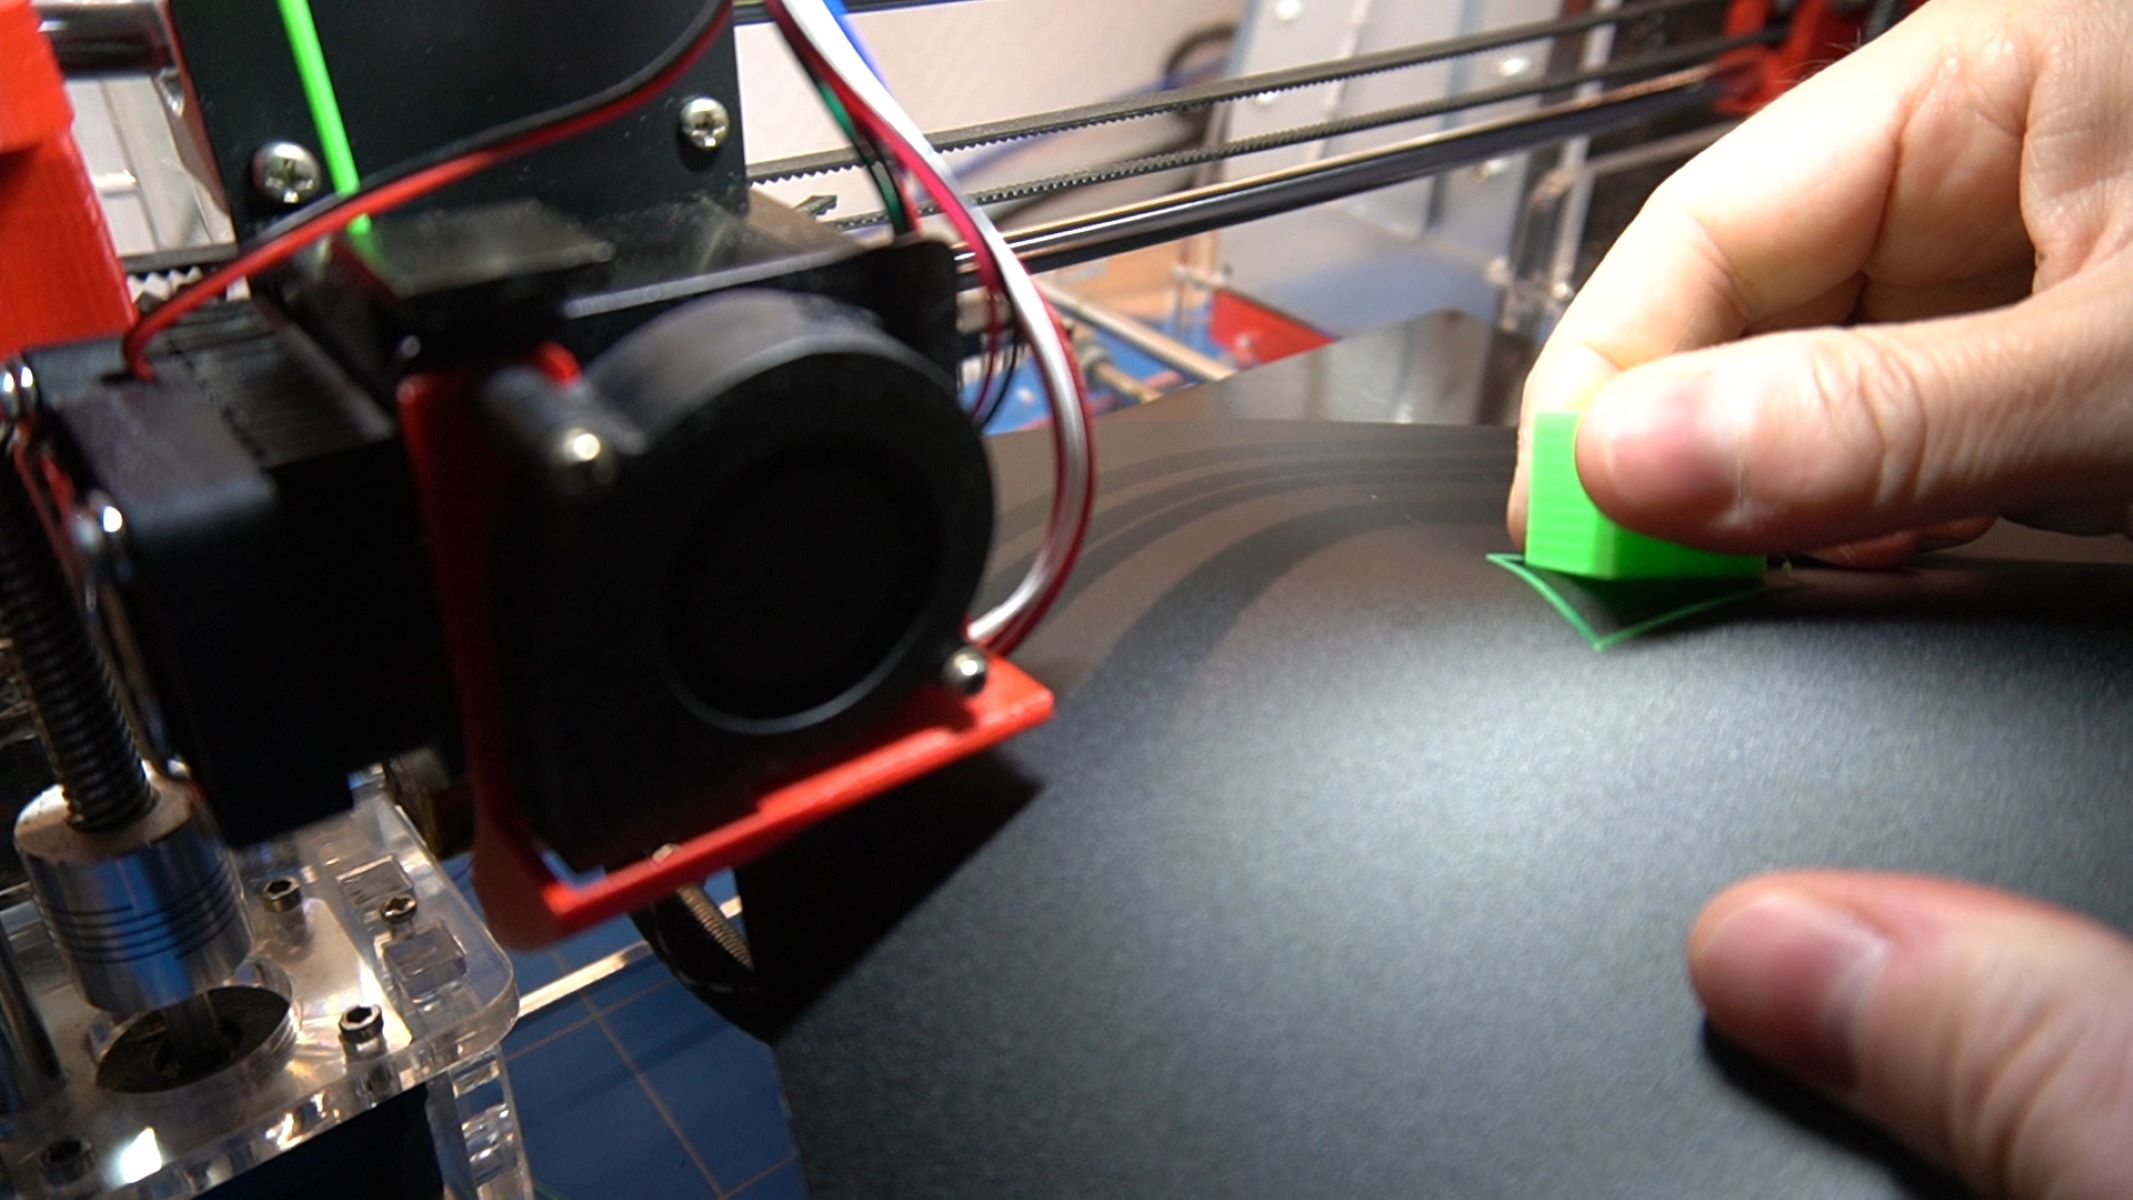 How To Clean The Bed Of A 3D Printer